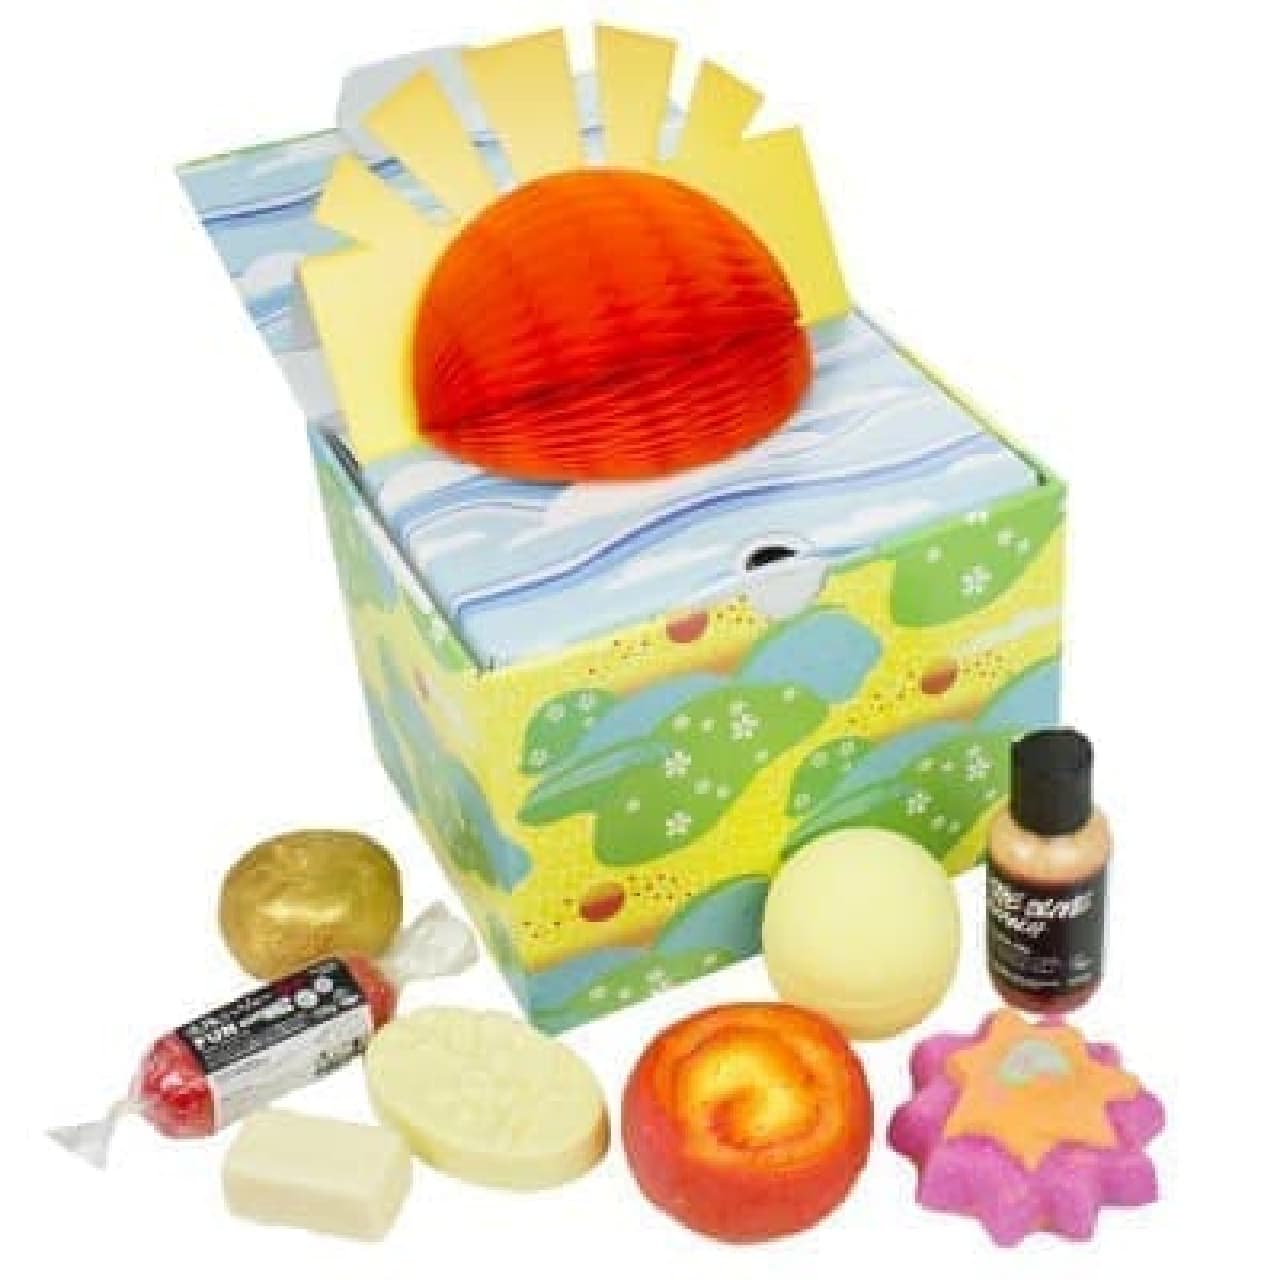 Sunrise when opened !? "Sunny Day" (7,120 yen), perfect for surprises